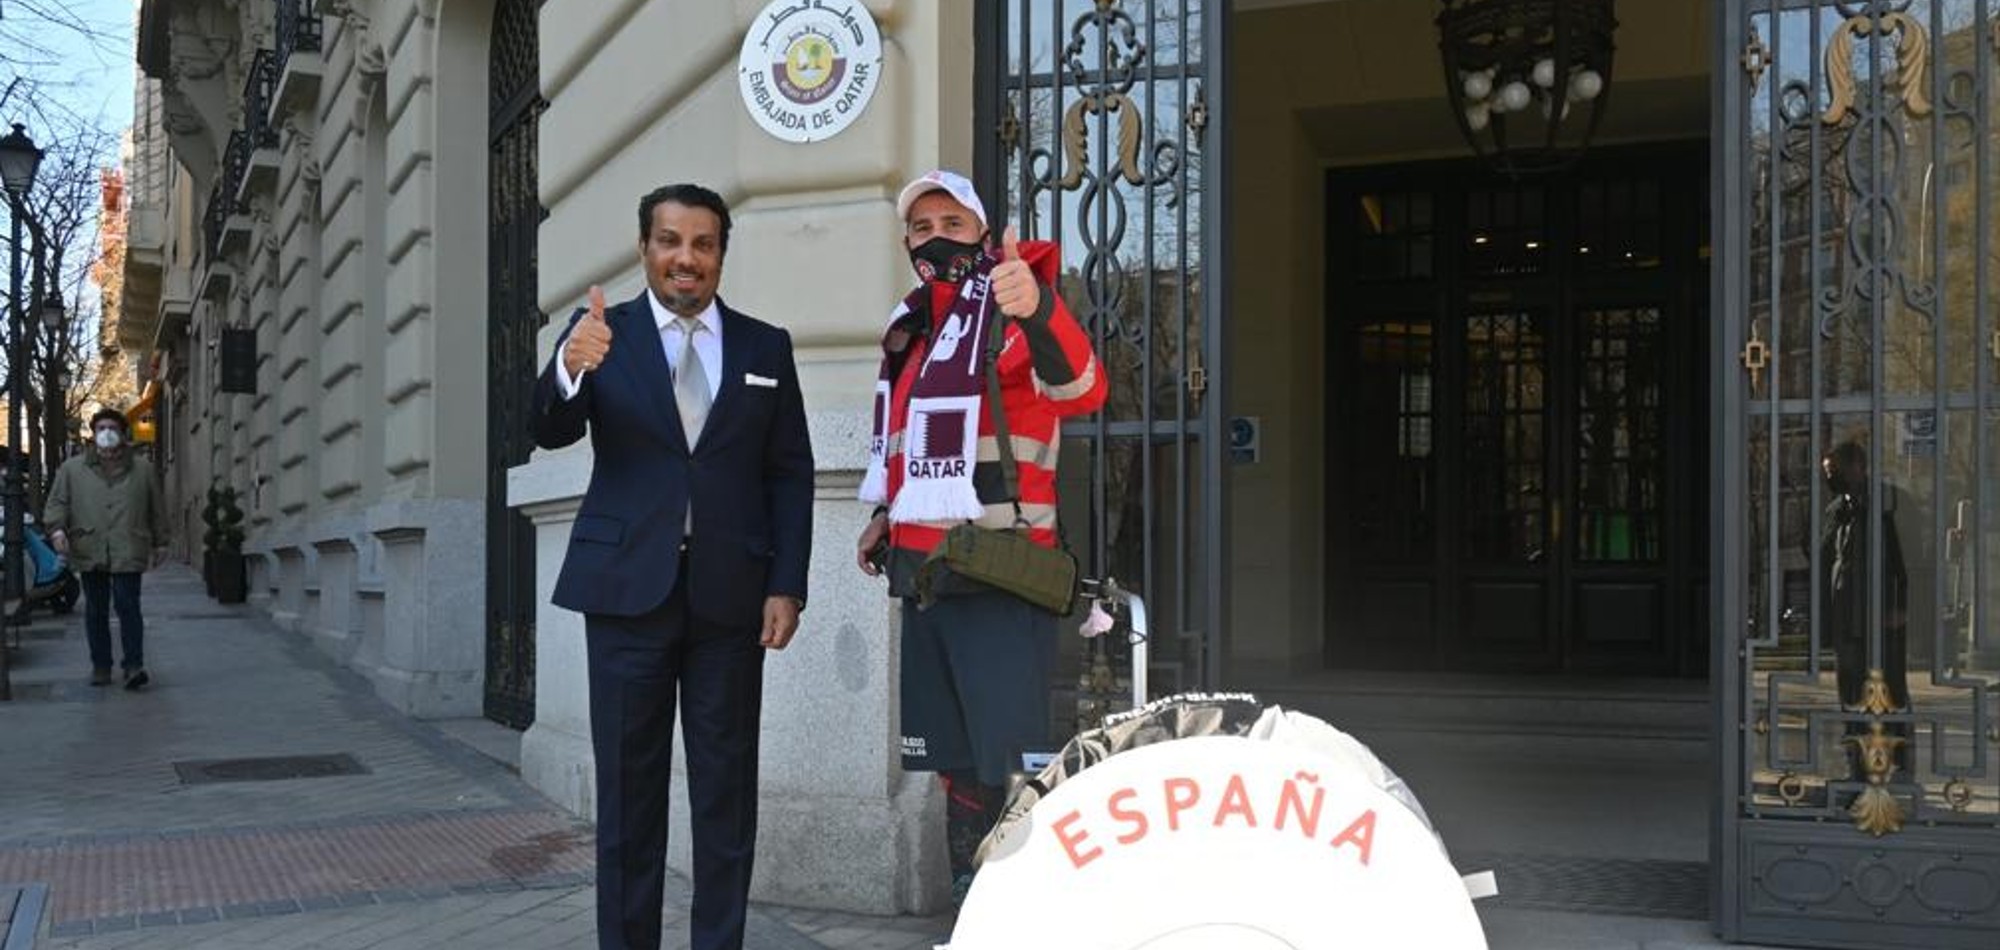 Spanish Adventurer Sanchez on a journey by foot reach Doha to Attend the FIFA World Cup Qatar 2022